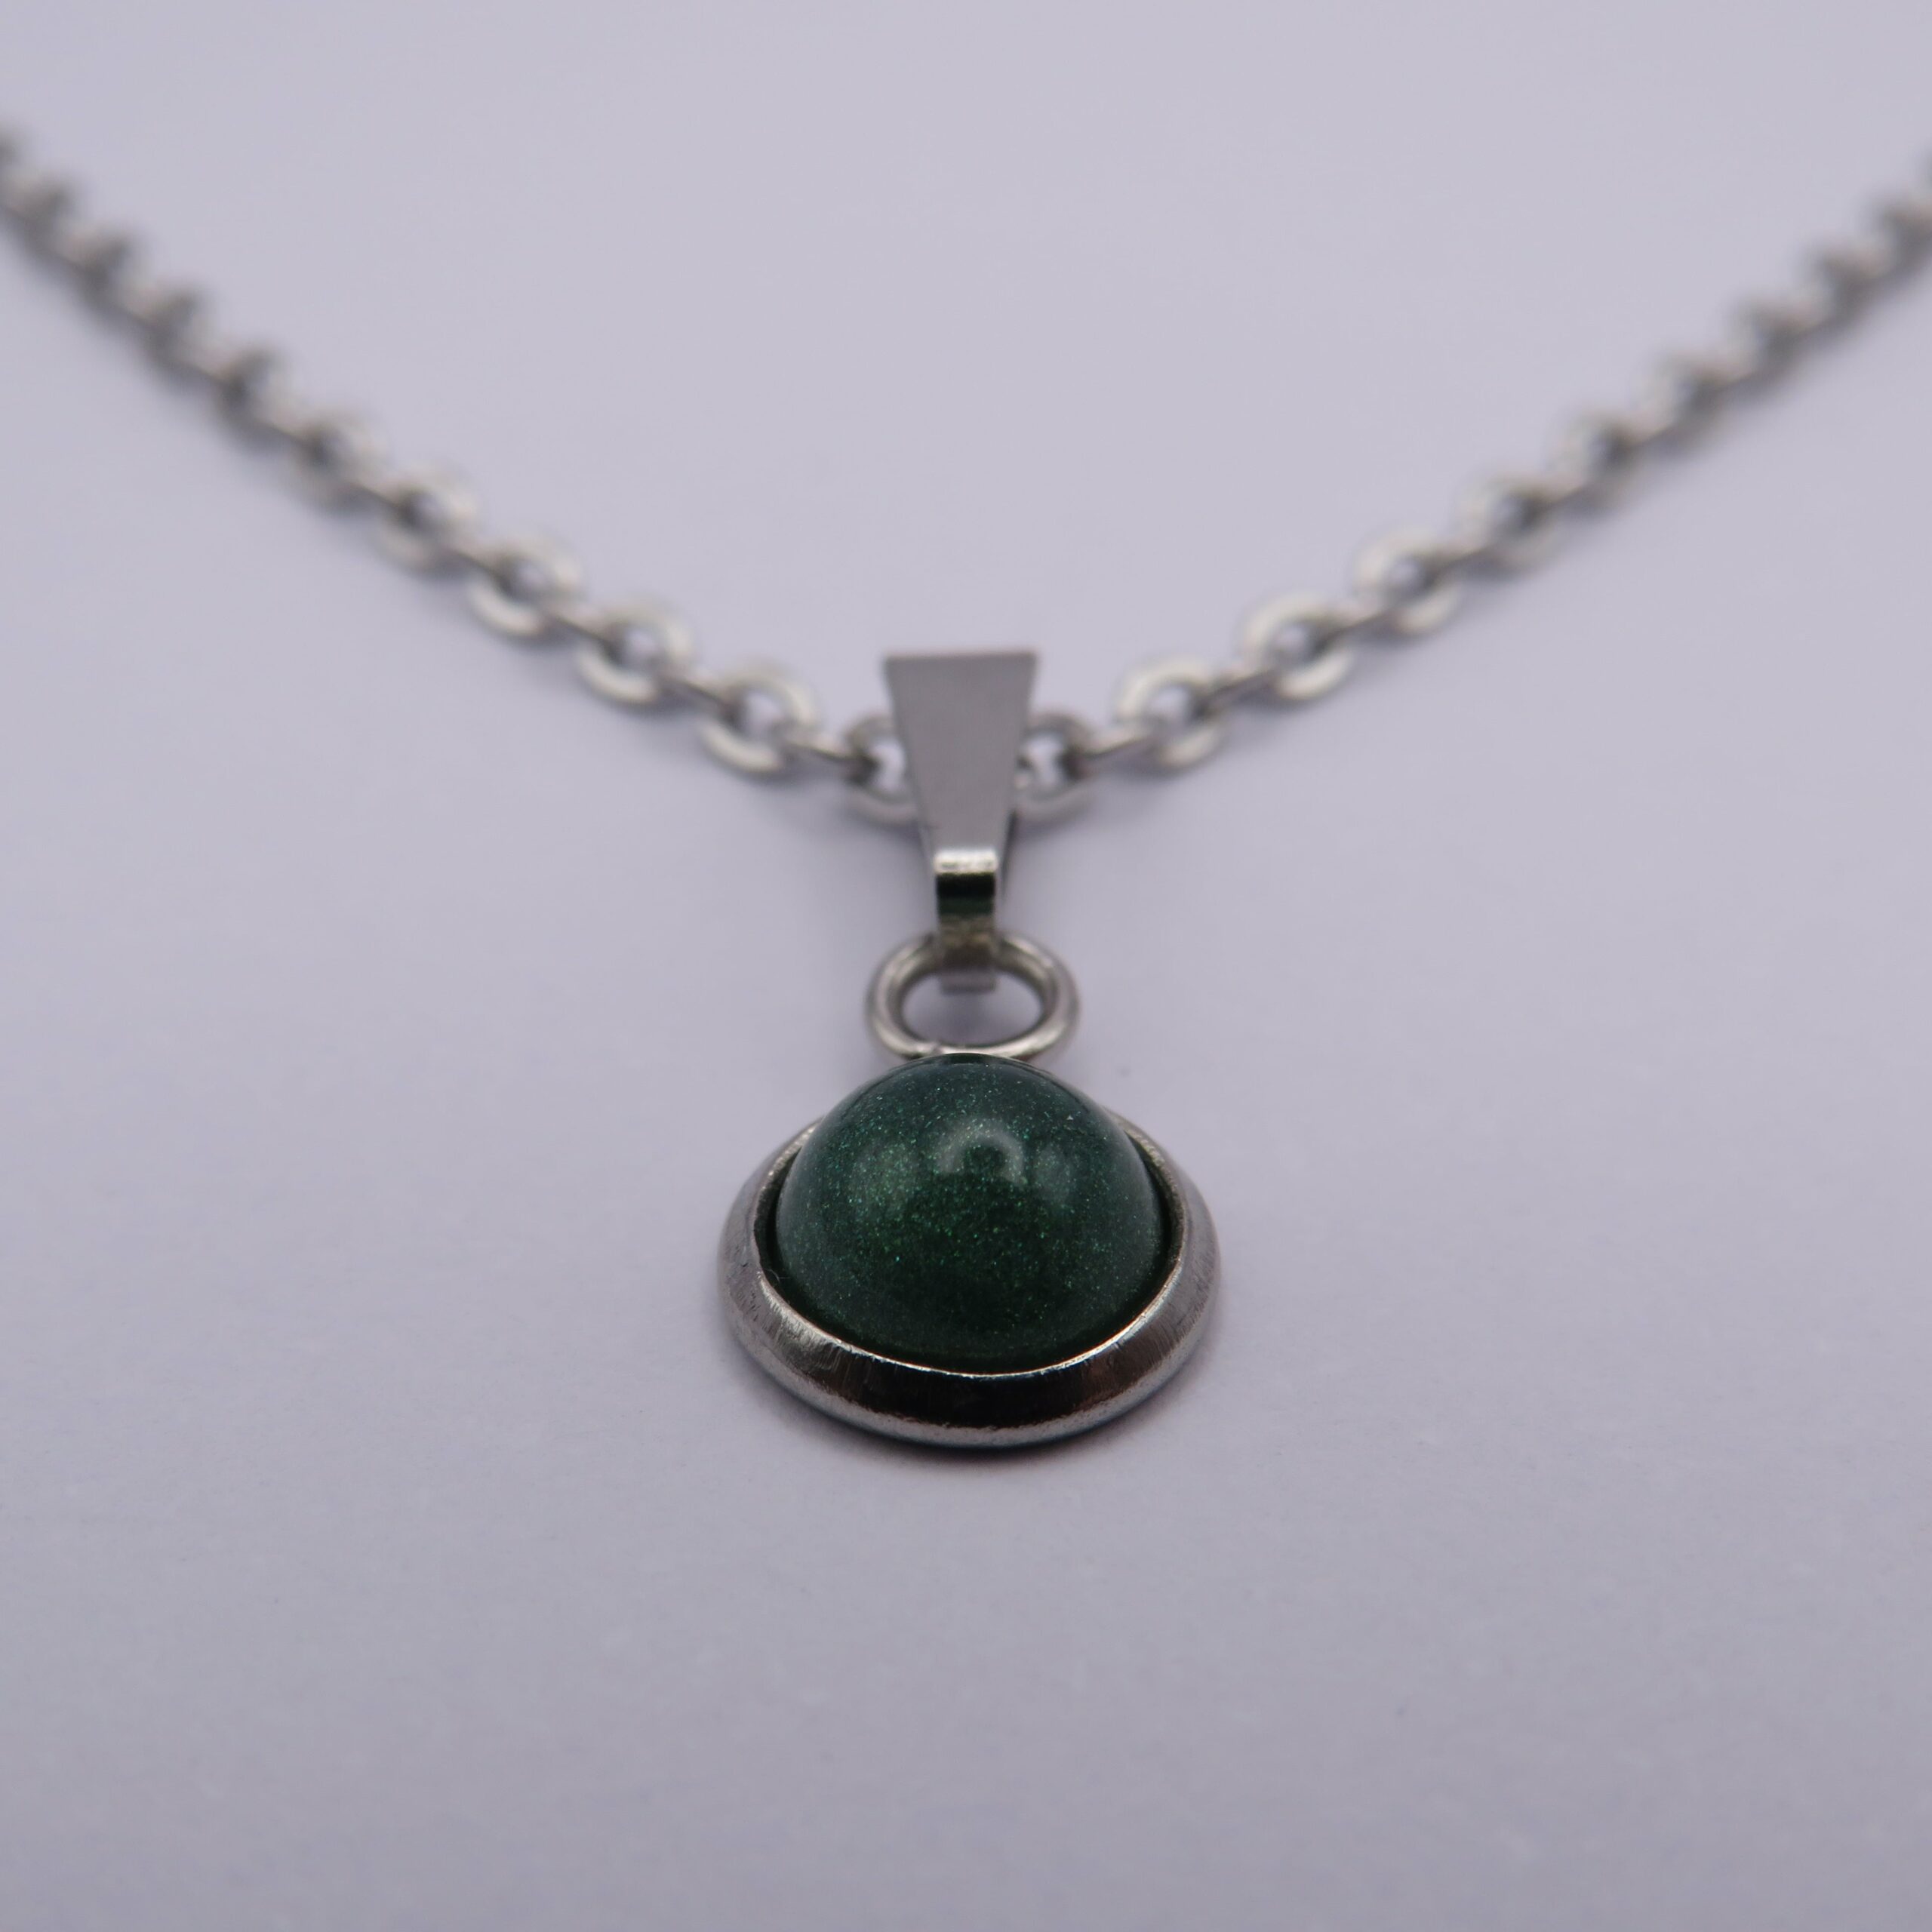 Stainless Steel Green Cabochon Pendant Necklace